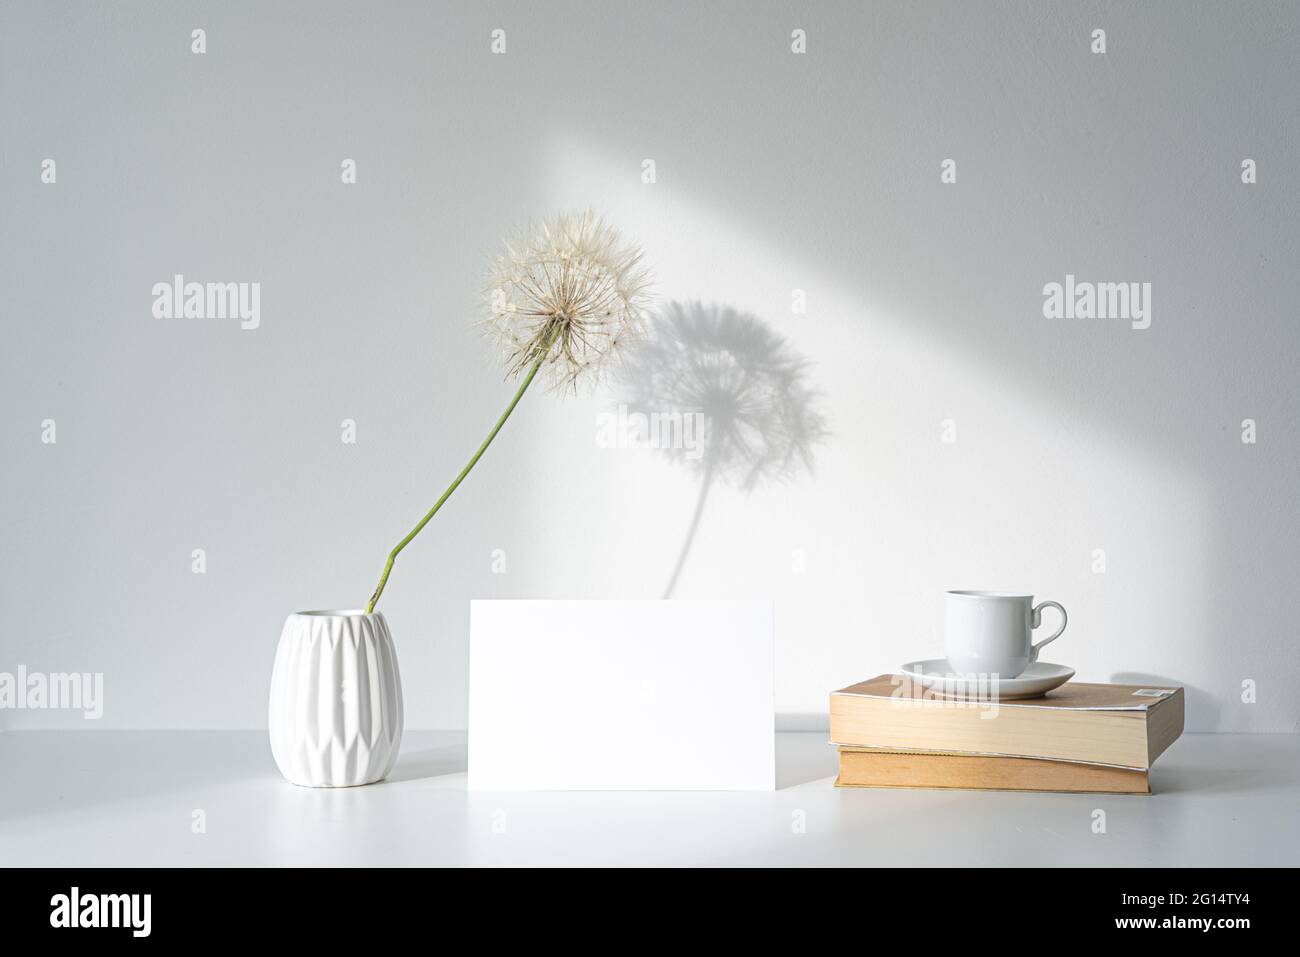 Empty white picture frame mockup in sunlight. Long shadow effect of shower head in the frame. Books and cup of coffee. Elegant lifestyle. White table Stock Photo